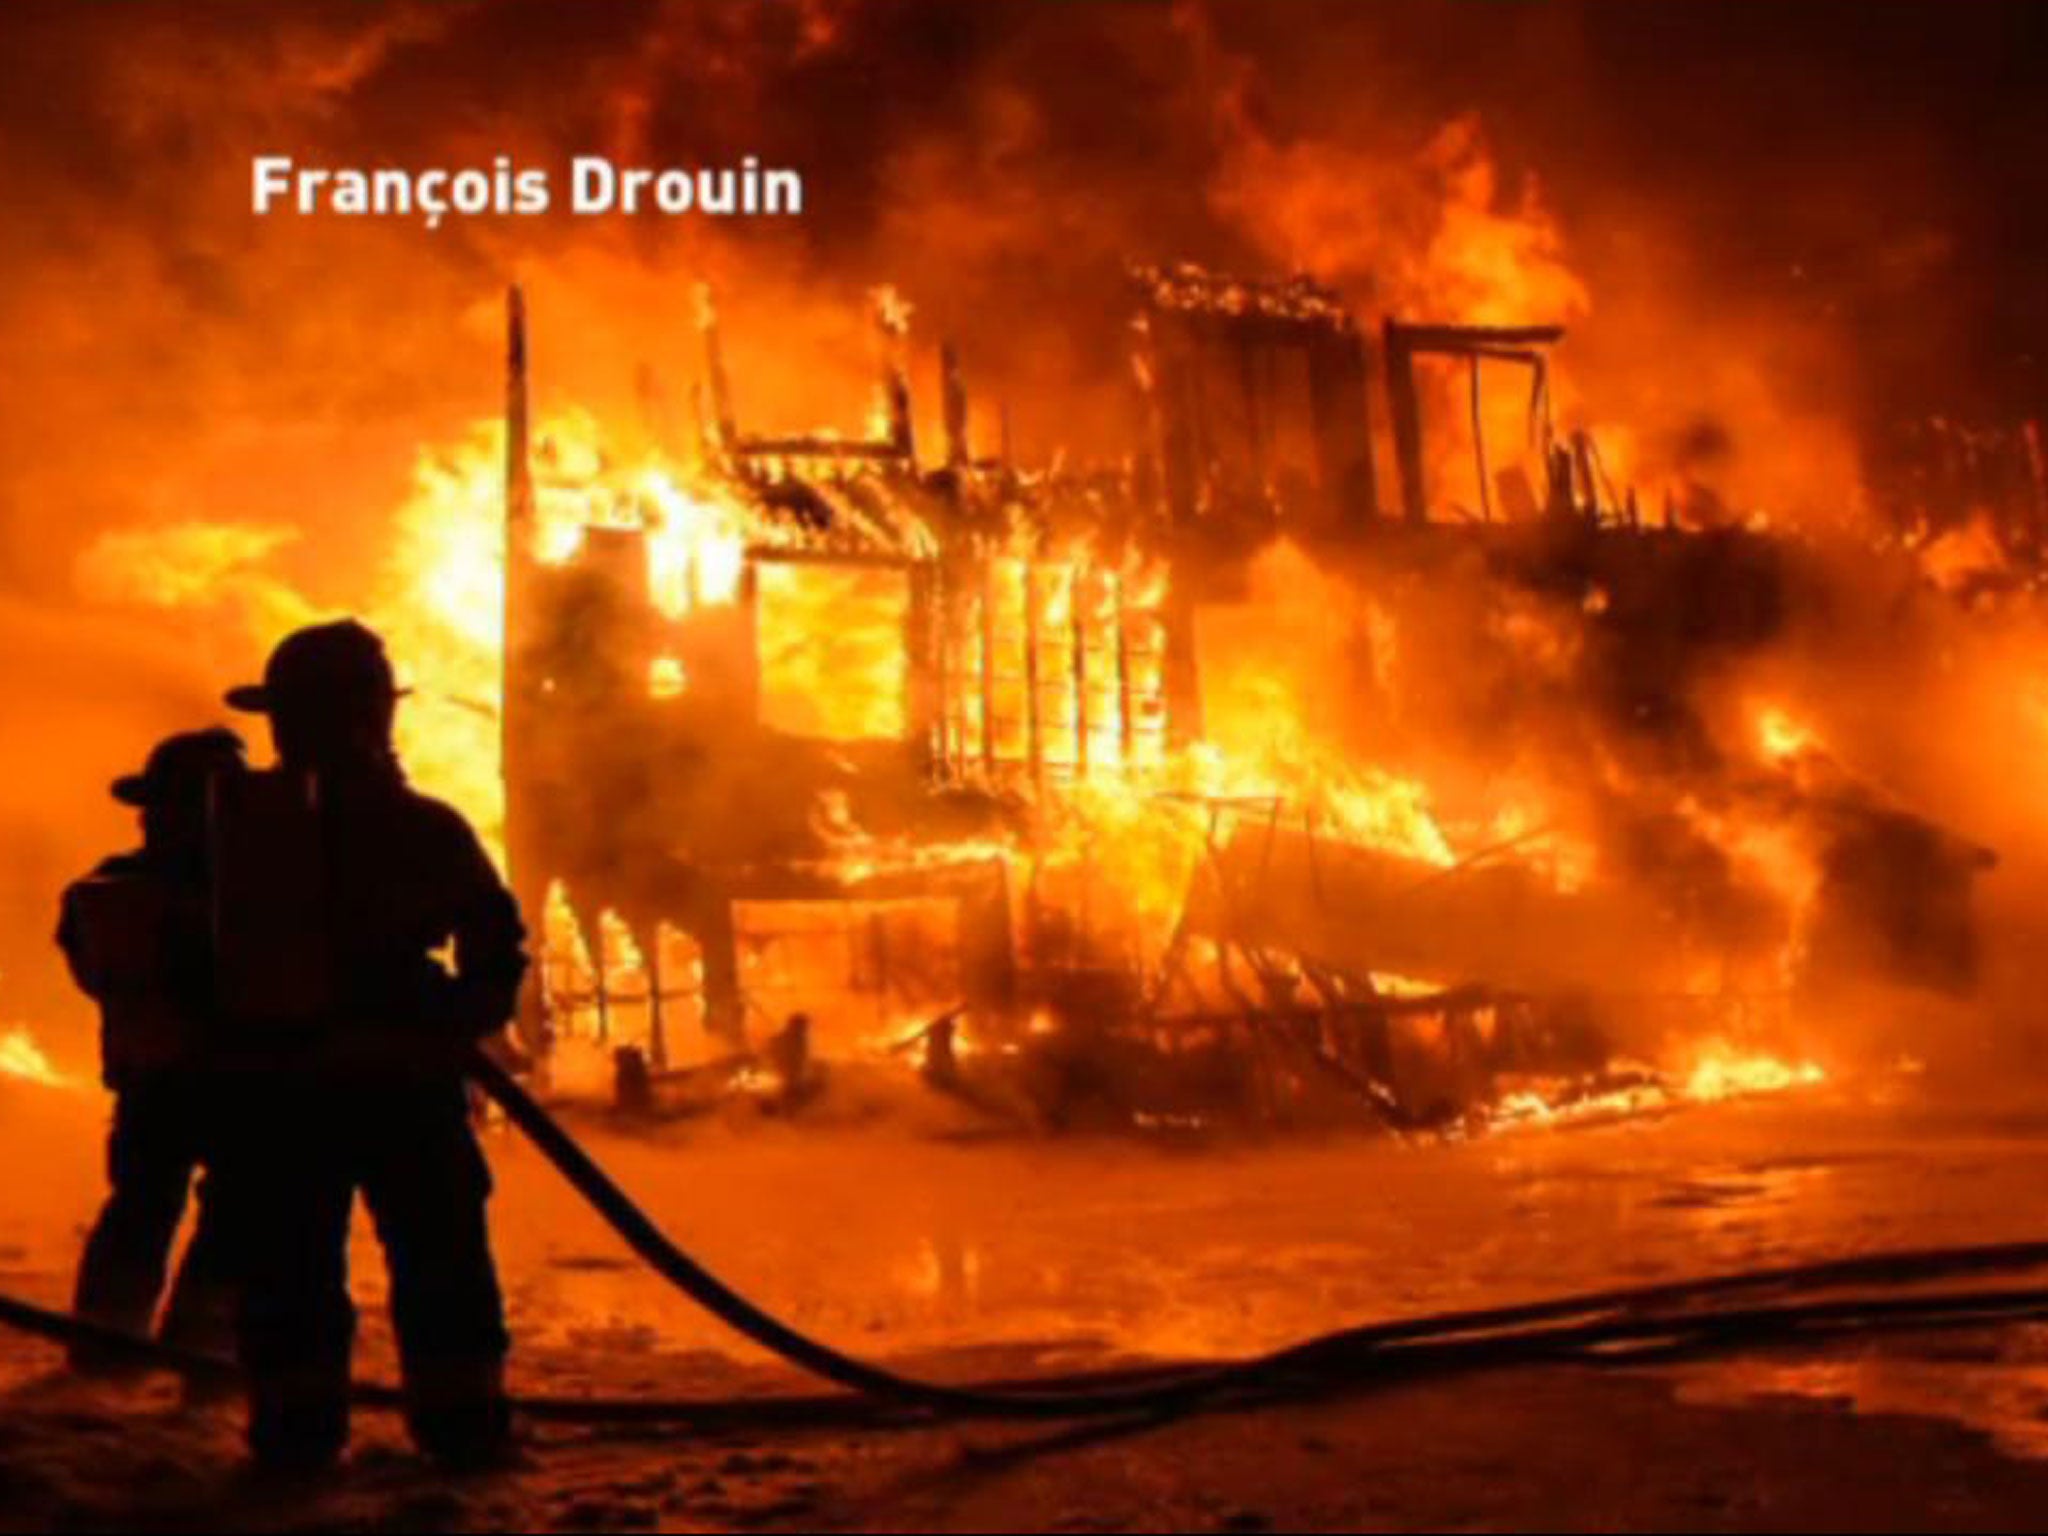 The fire as it took hold of the building in Quebec